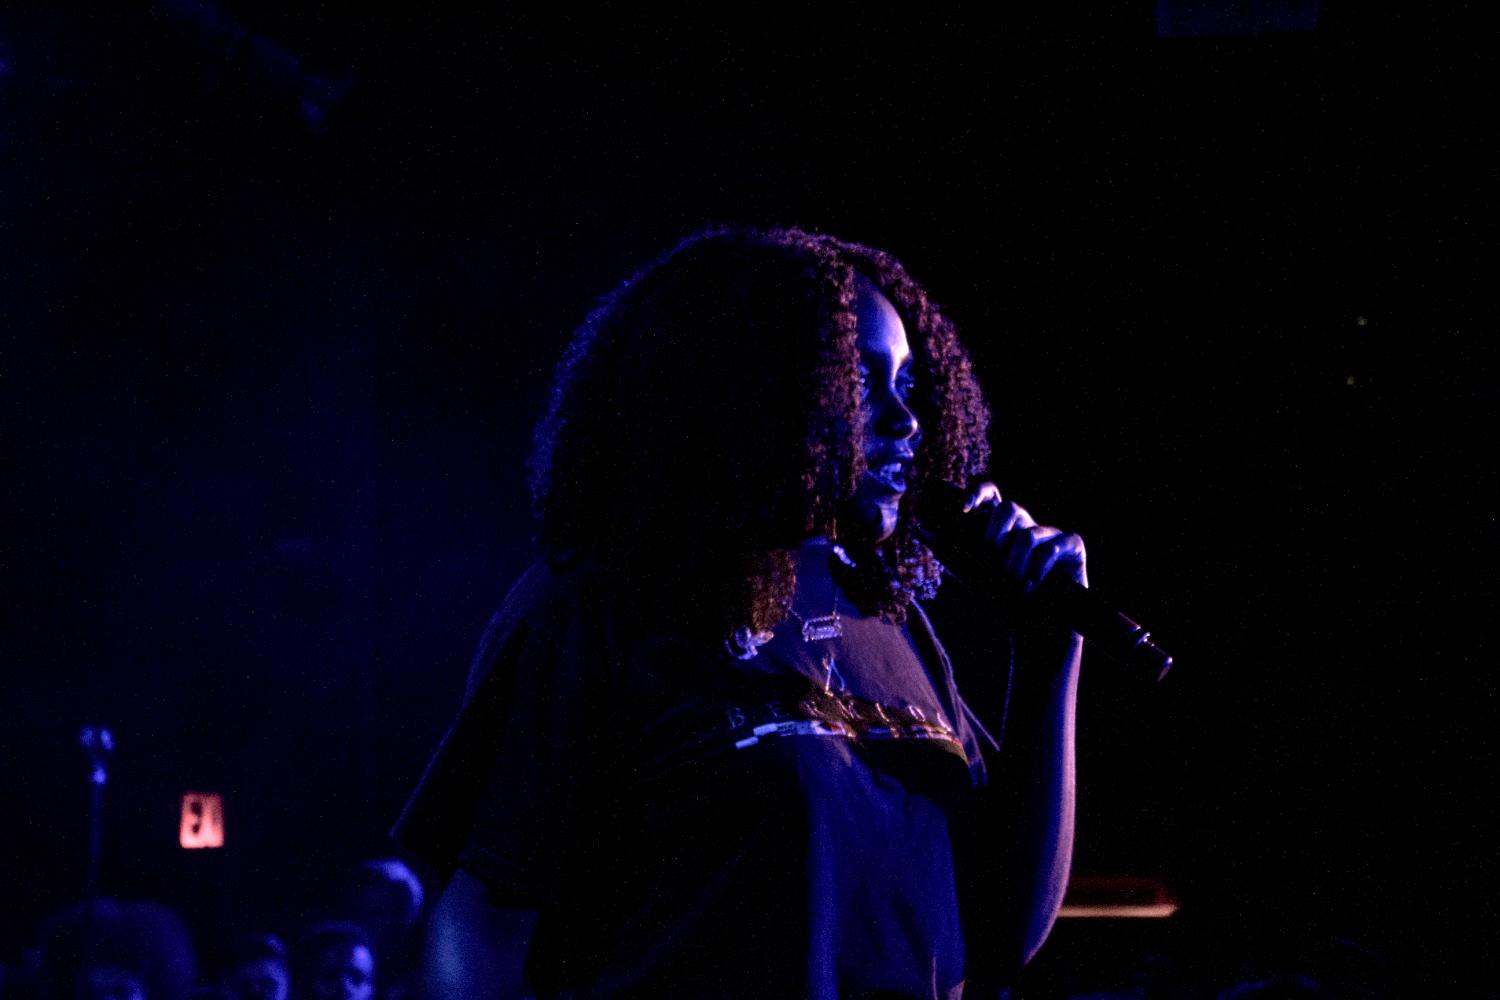 Noname was one of the many performers for the Mystery Concert.